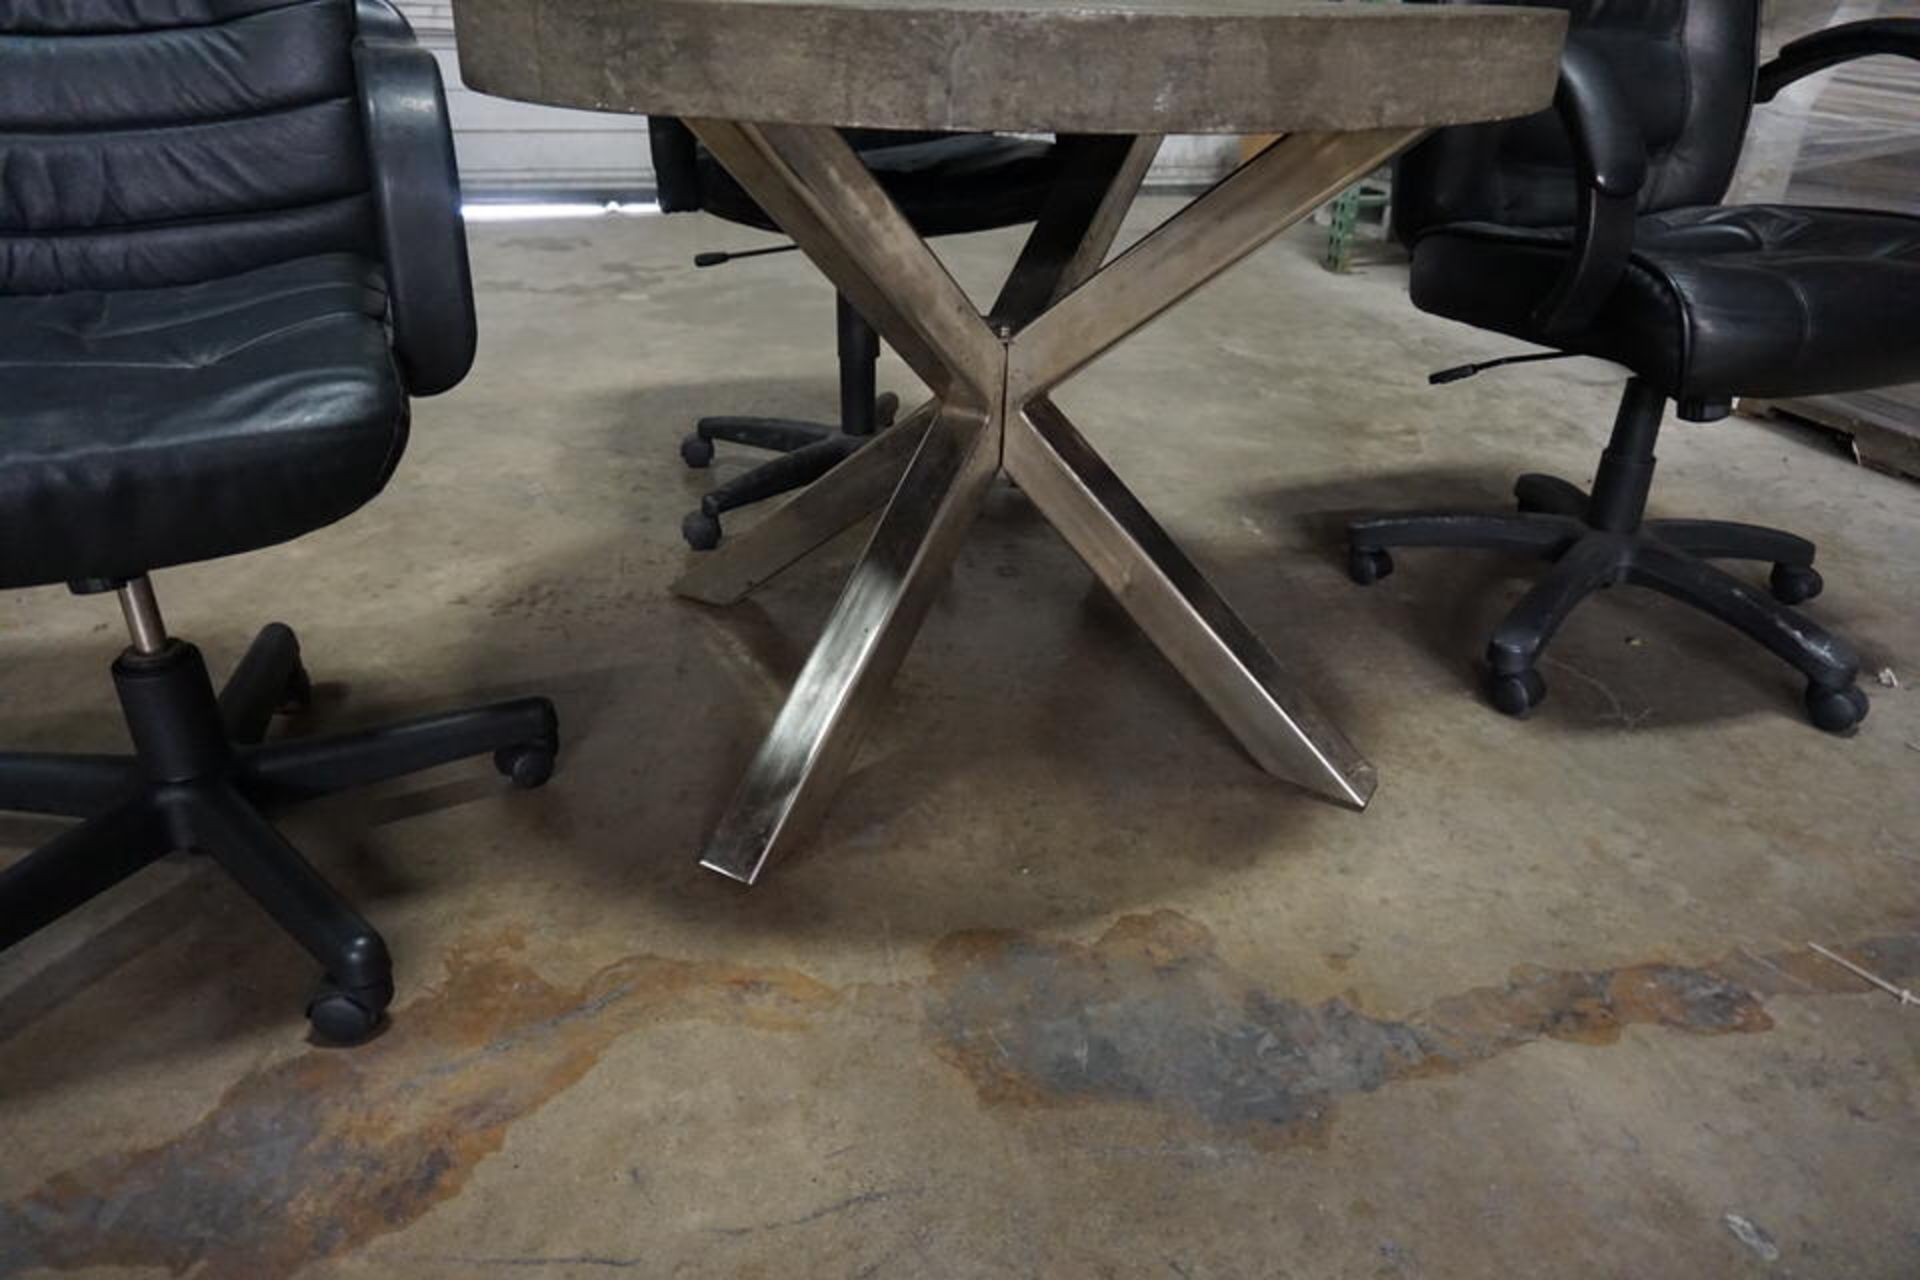 OFFICE CONFERENCE TABLE 42" DIA W/ (3) CHAIRS - Image 2 of 3